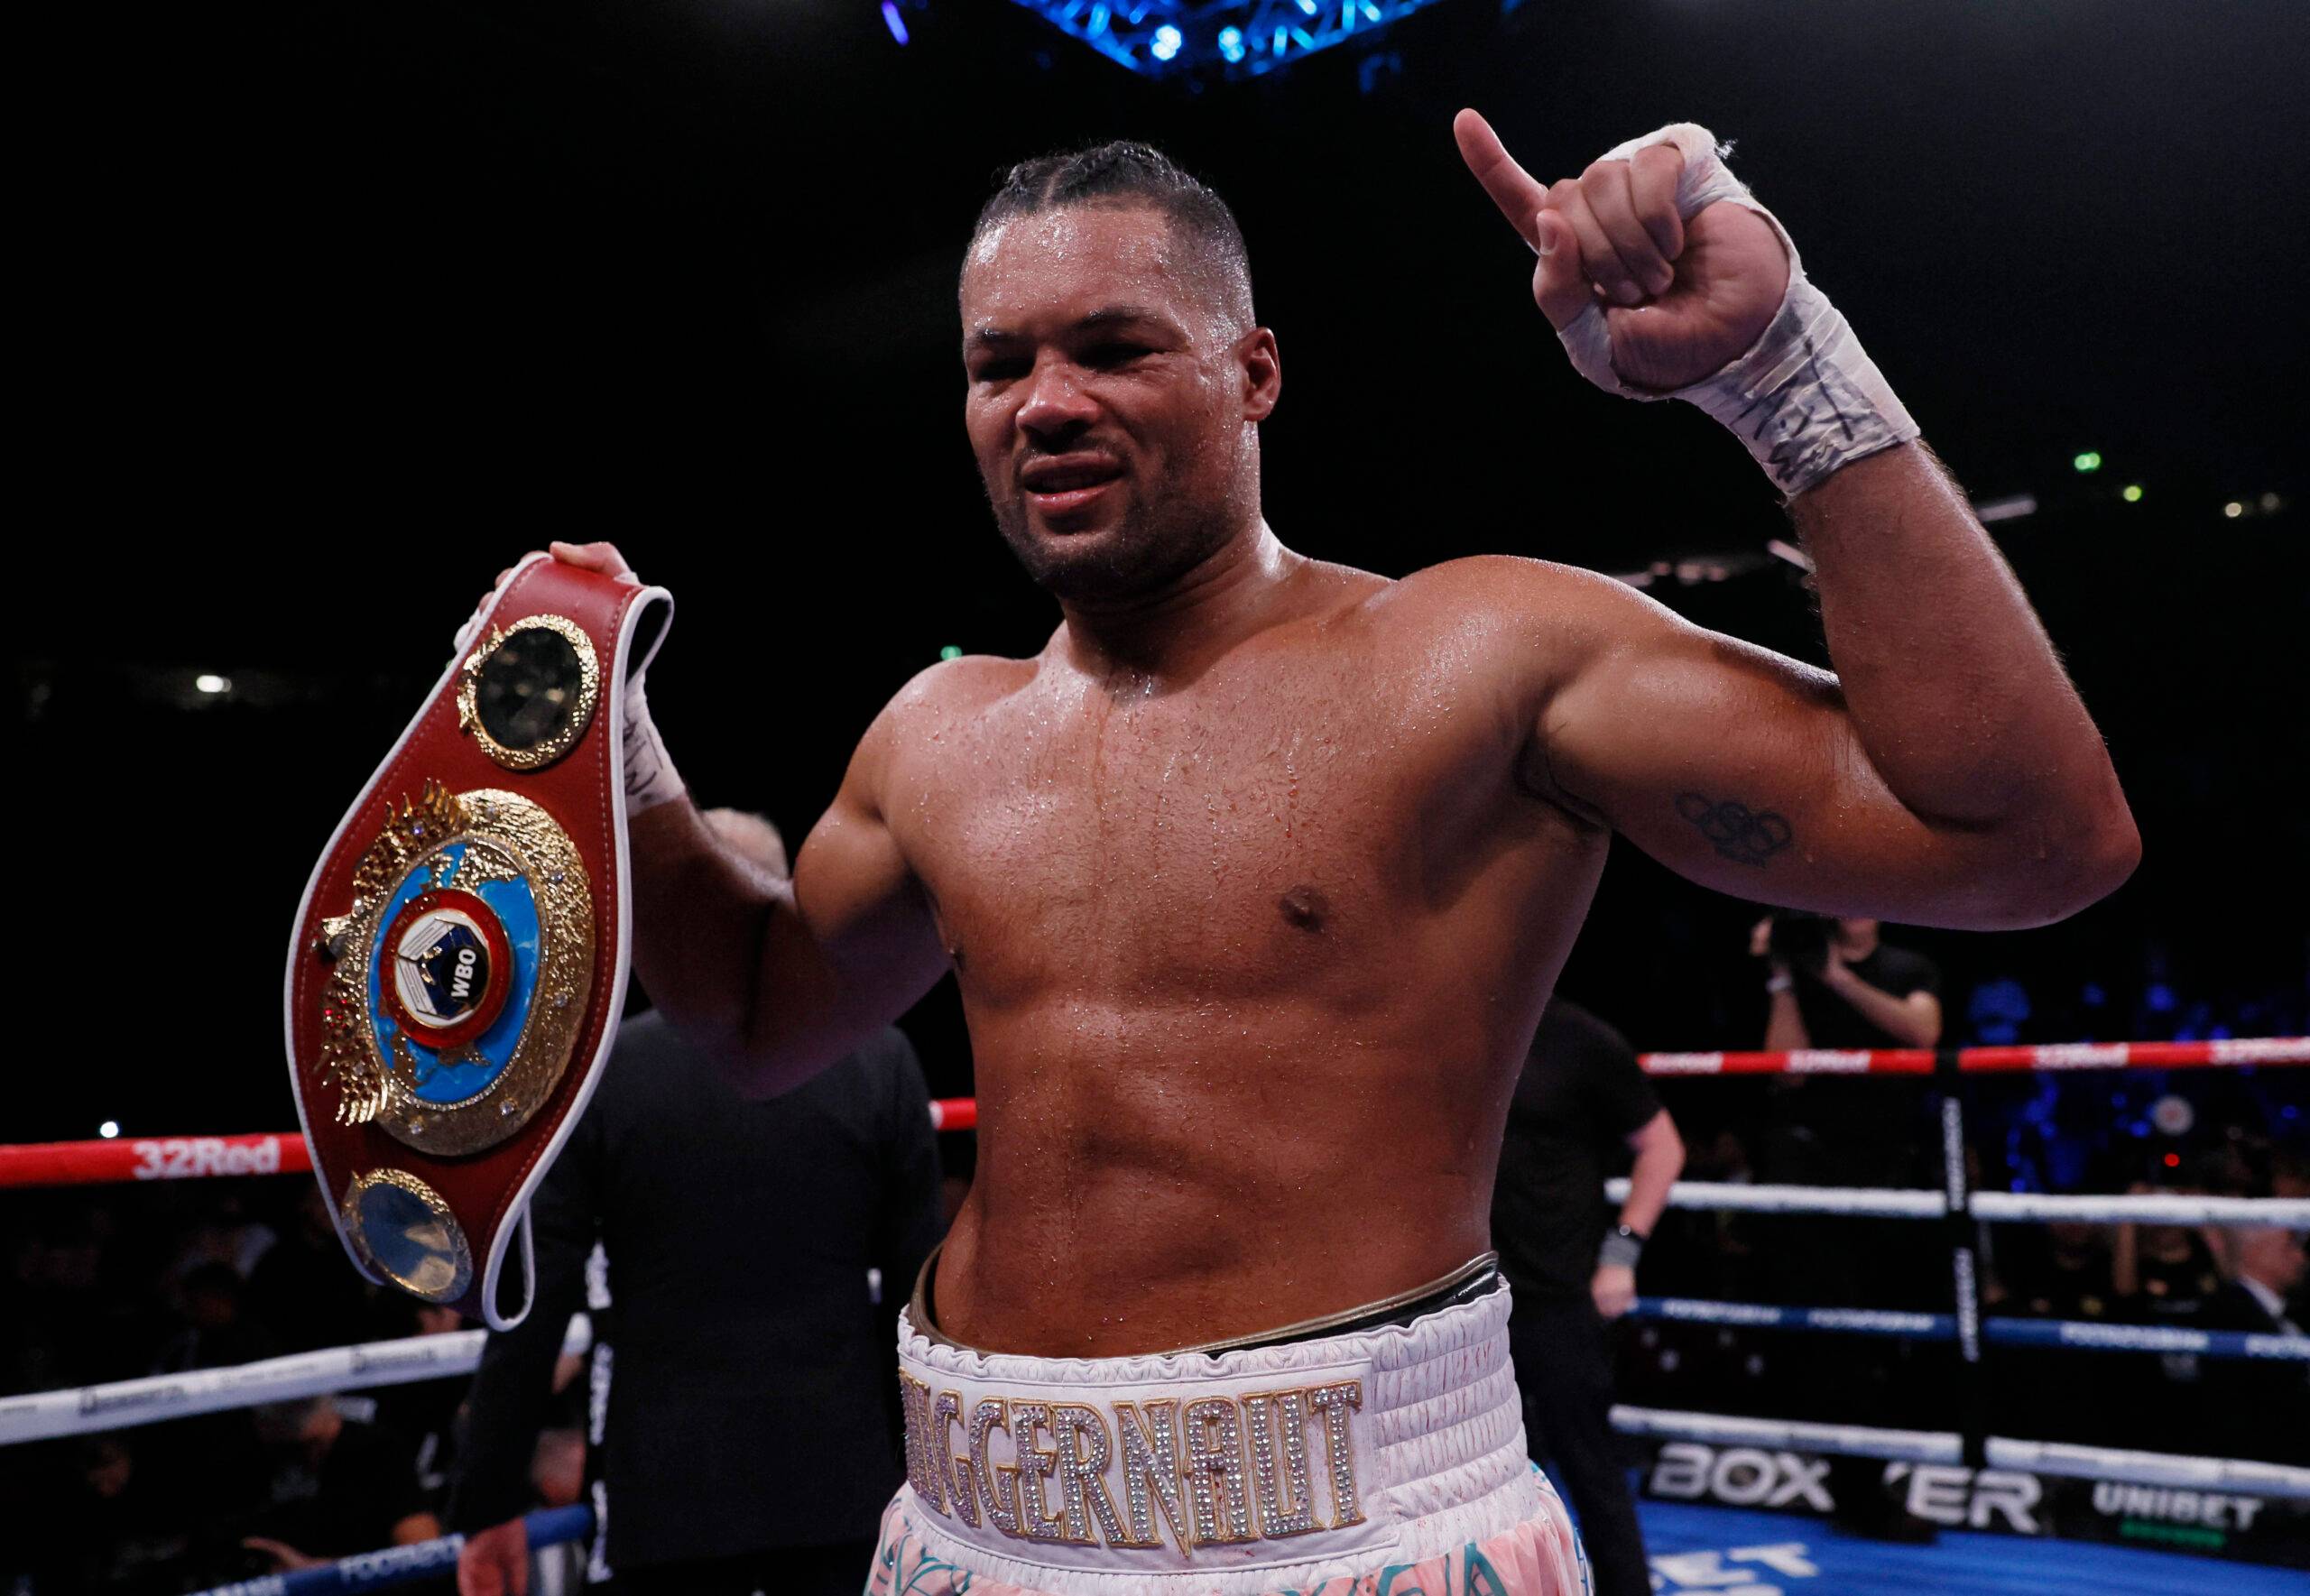 Joe Joyce says Oleksandr Usyk should vacate 'if he doesn't want to fight me'